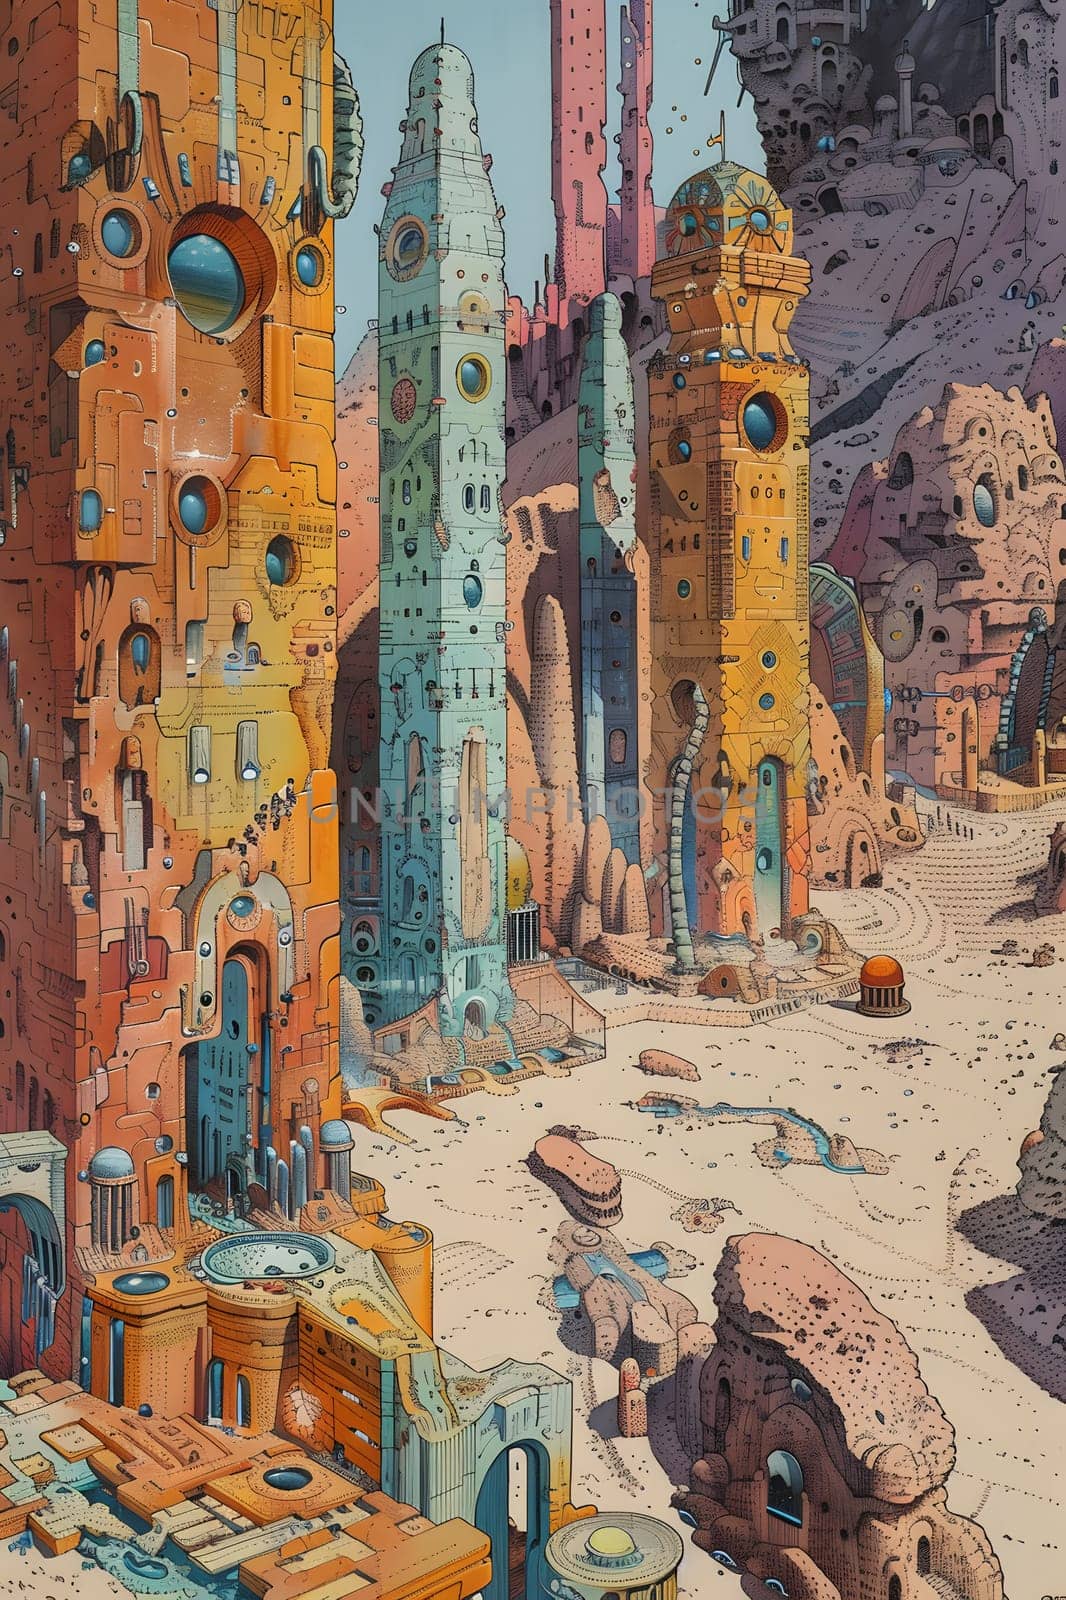 A watercolor painting of a futuristic city in the desert by Nadtochiy